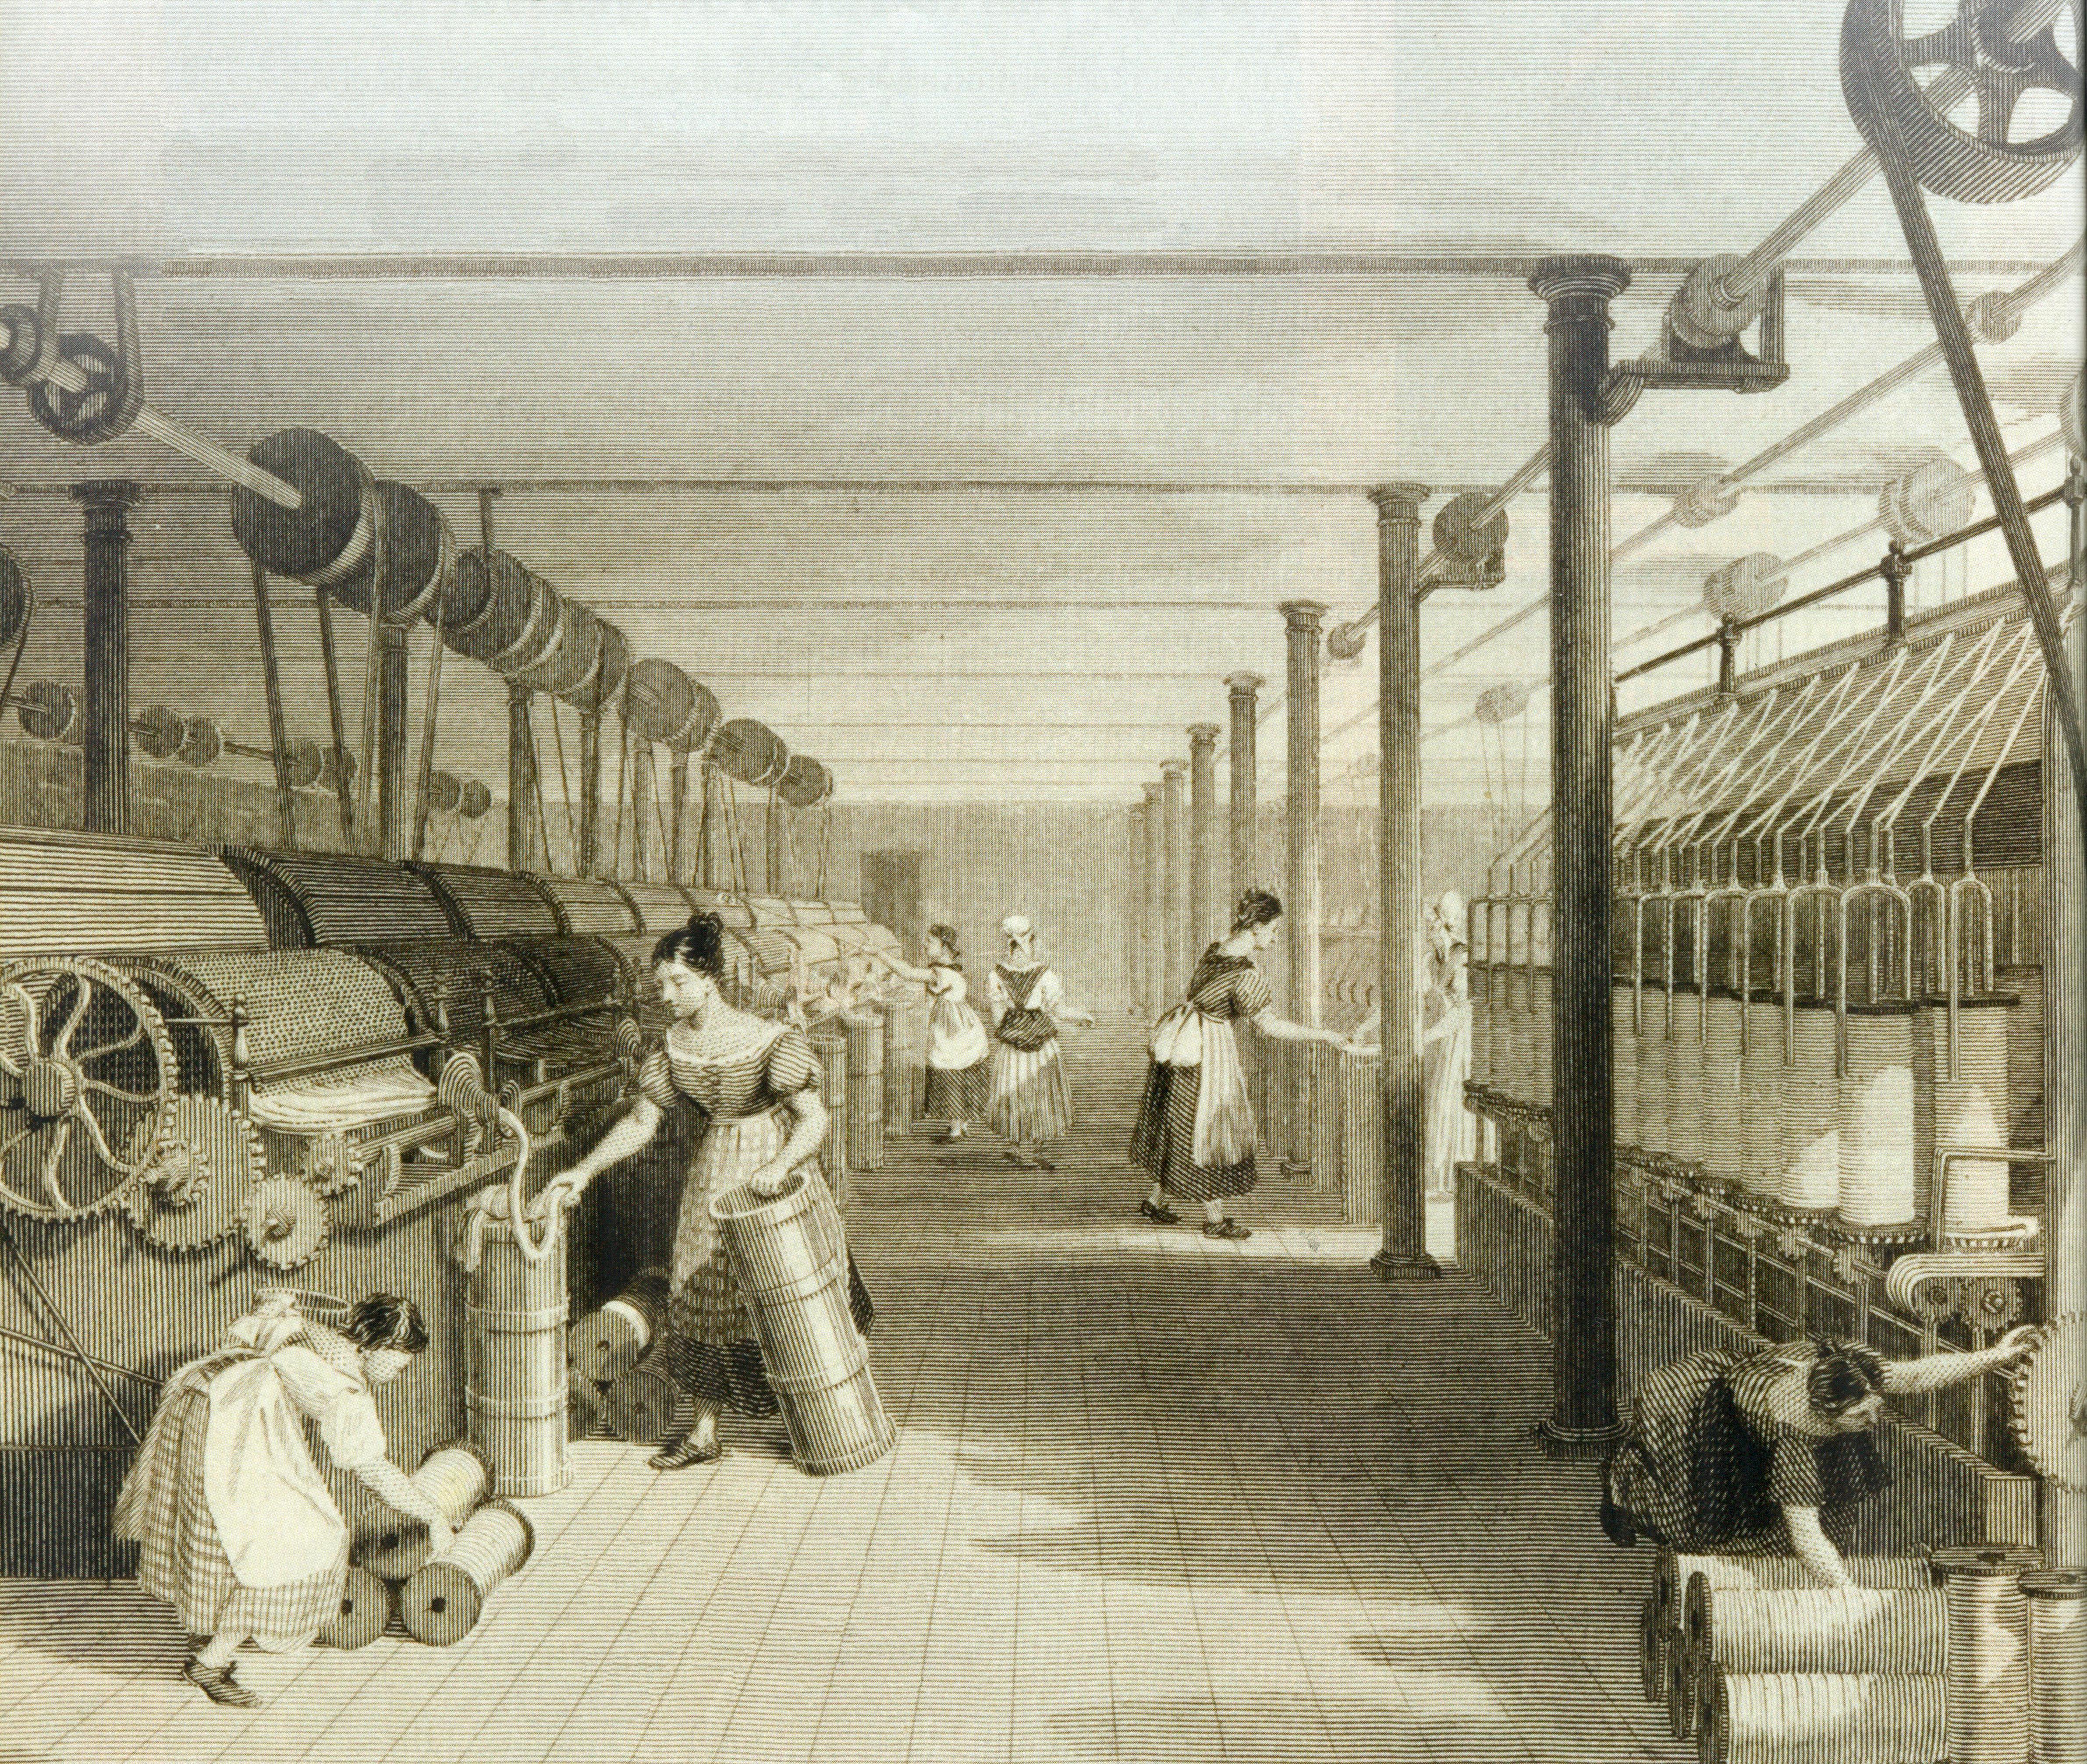 child labor during the industrial revolution